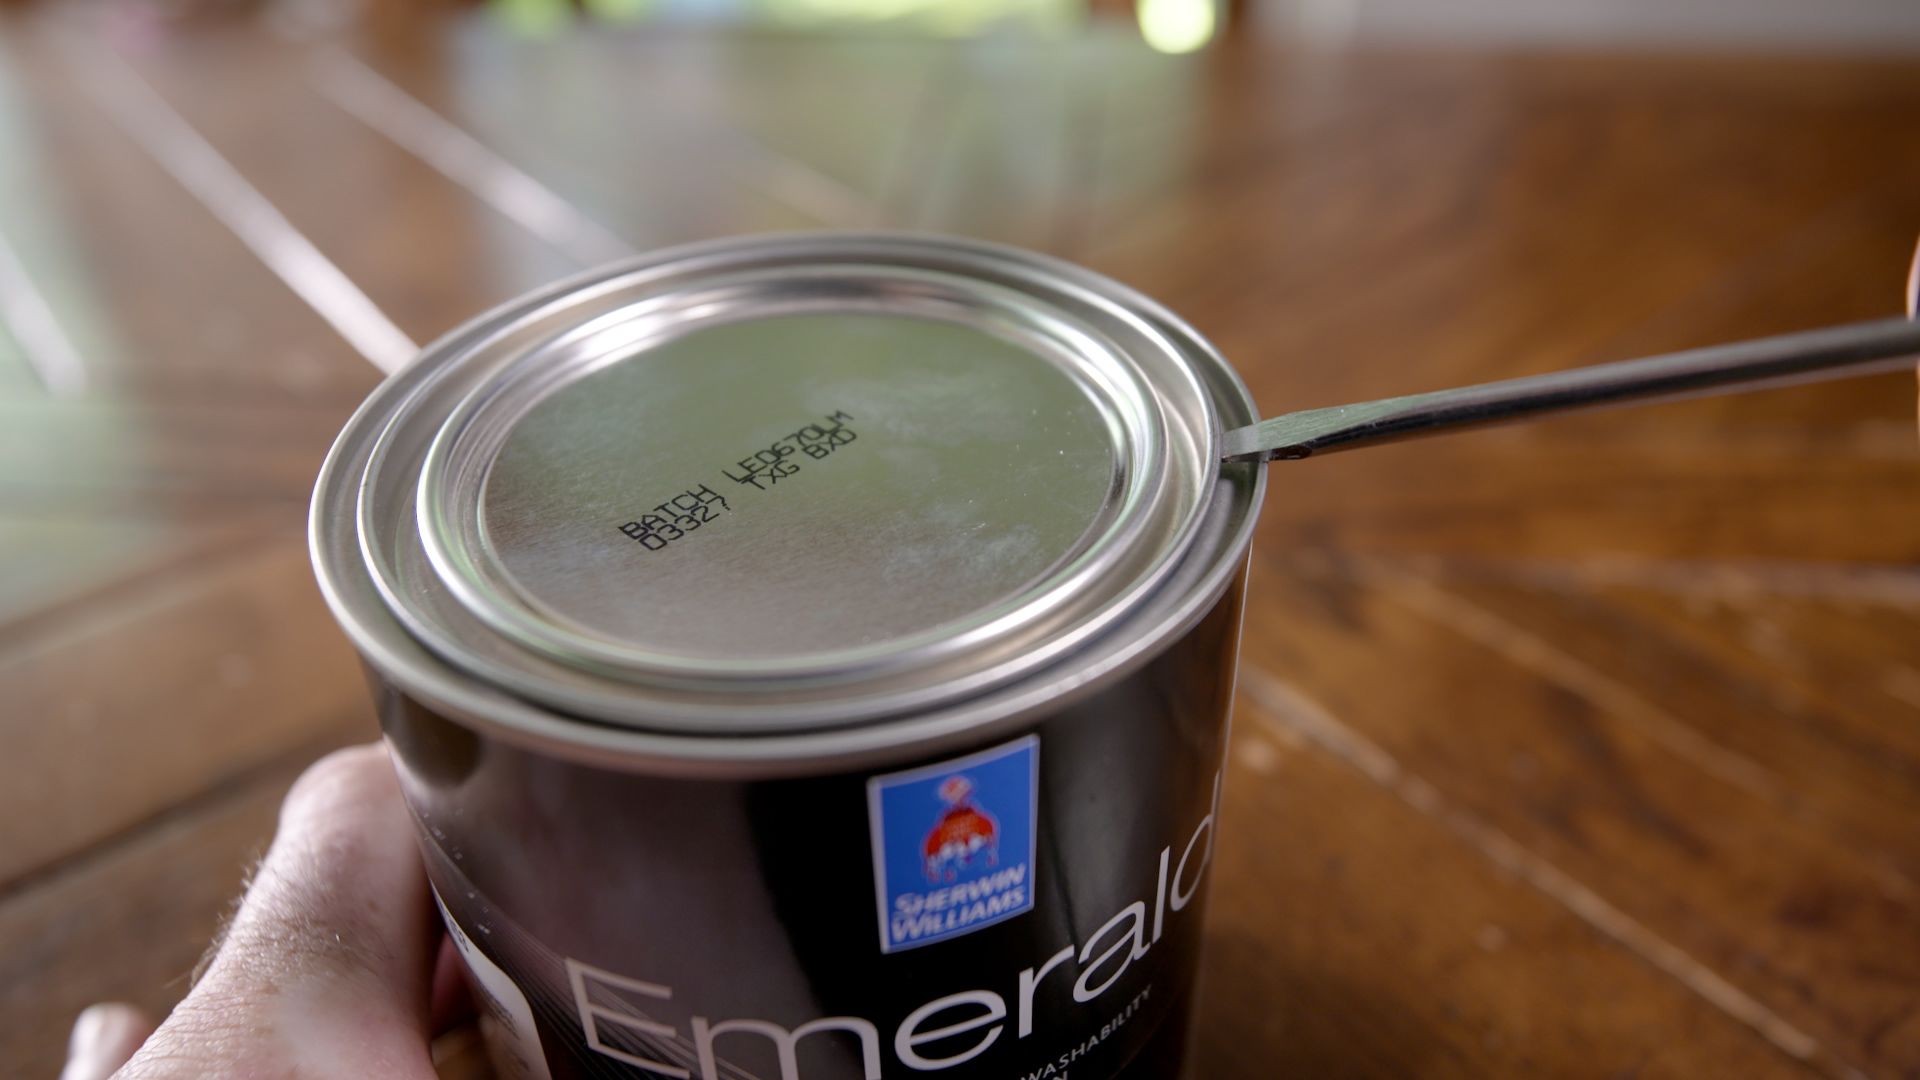 How to Open a Paint Can Without Making a Huge Mess